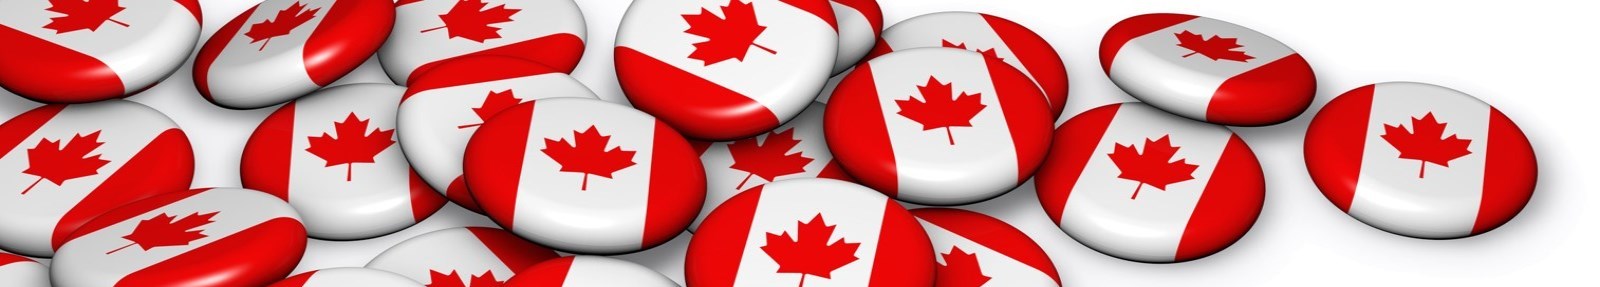 buttons with maple leaf flag